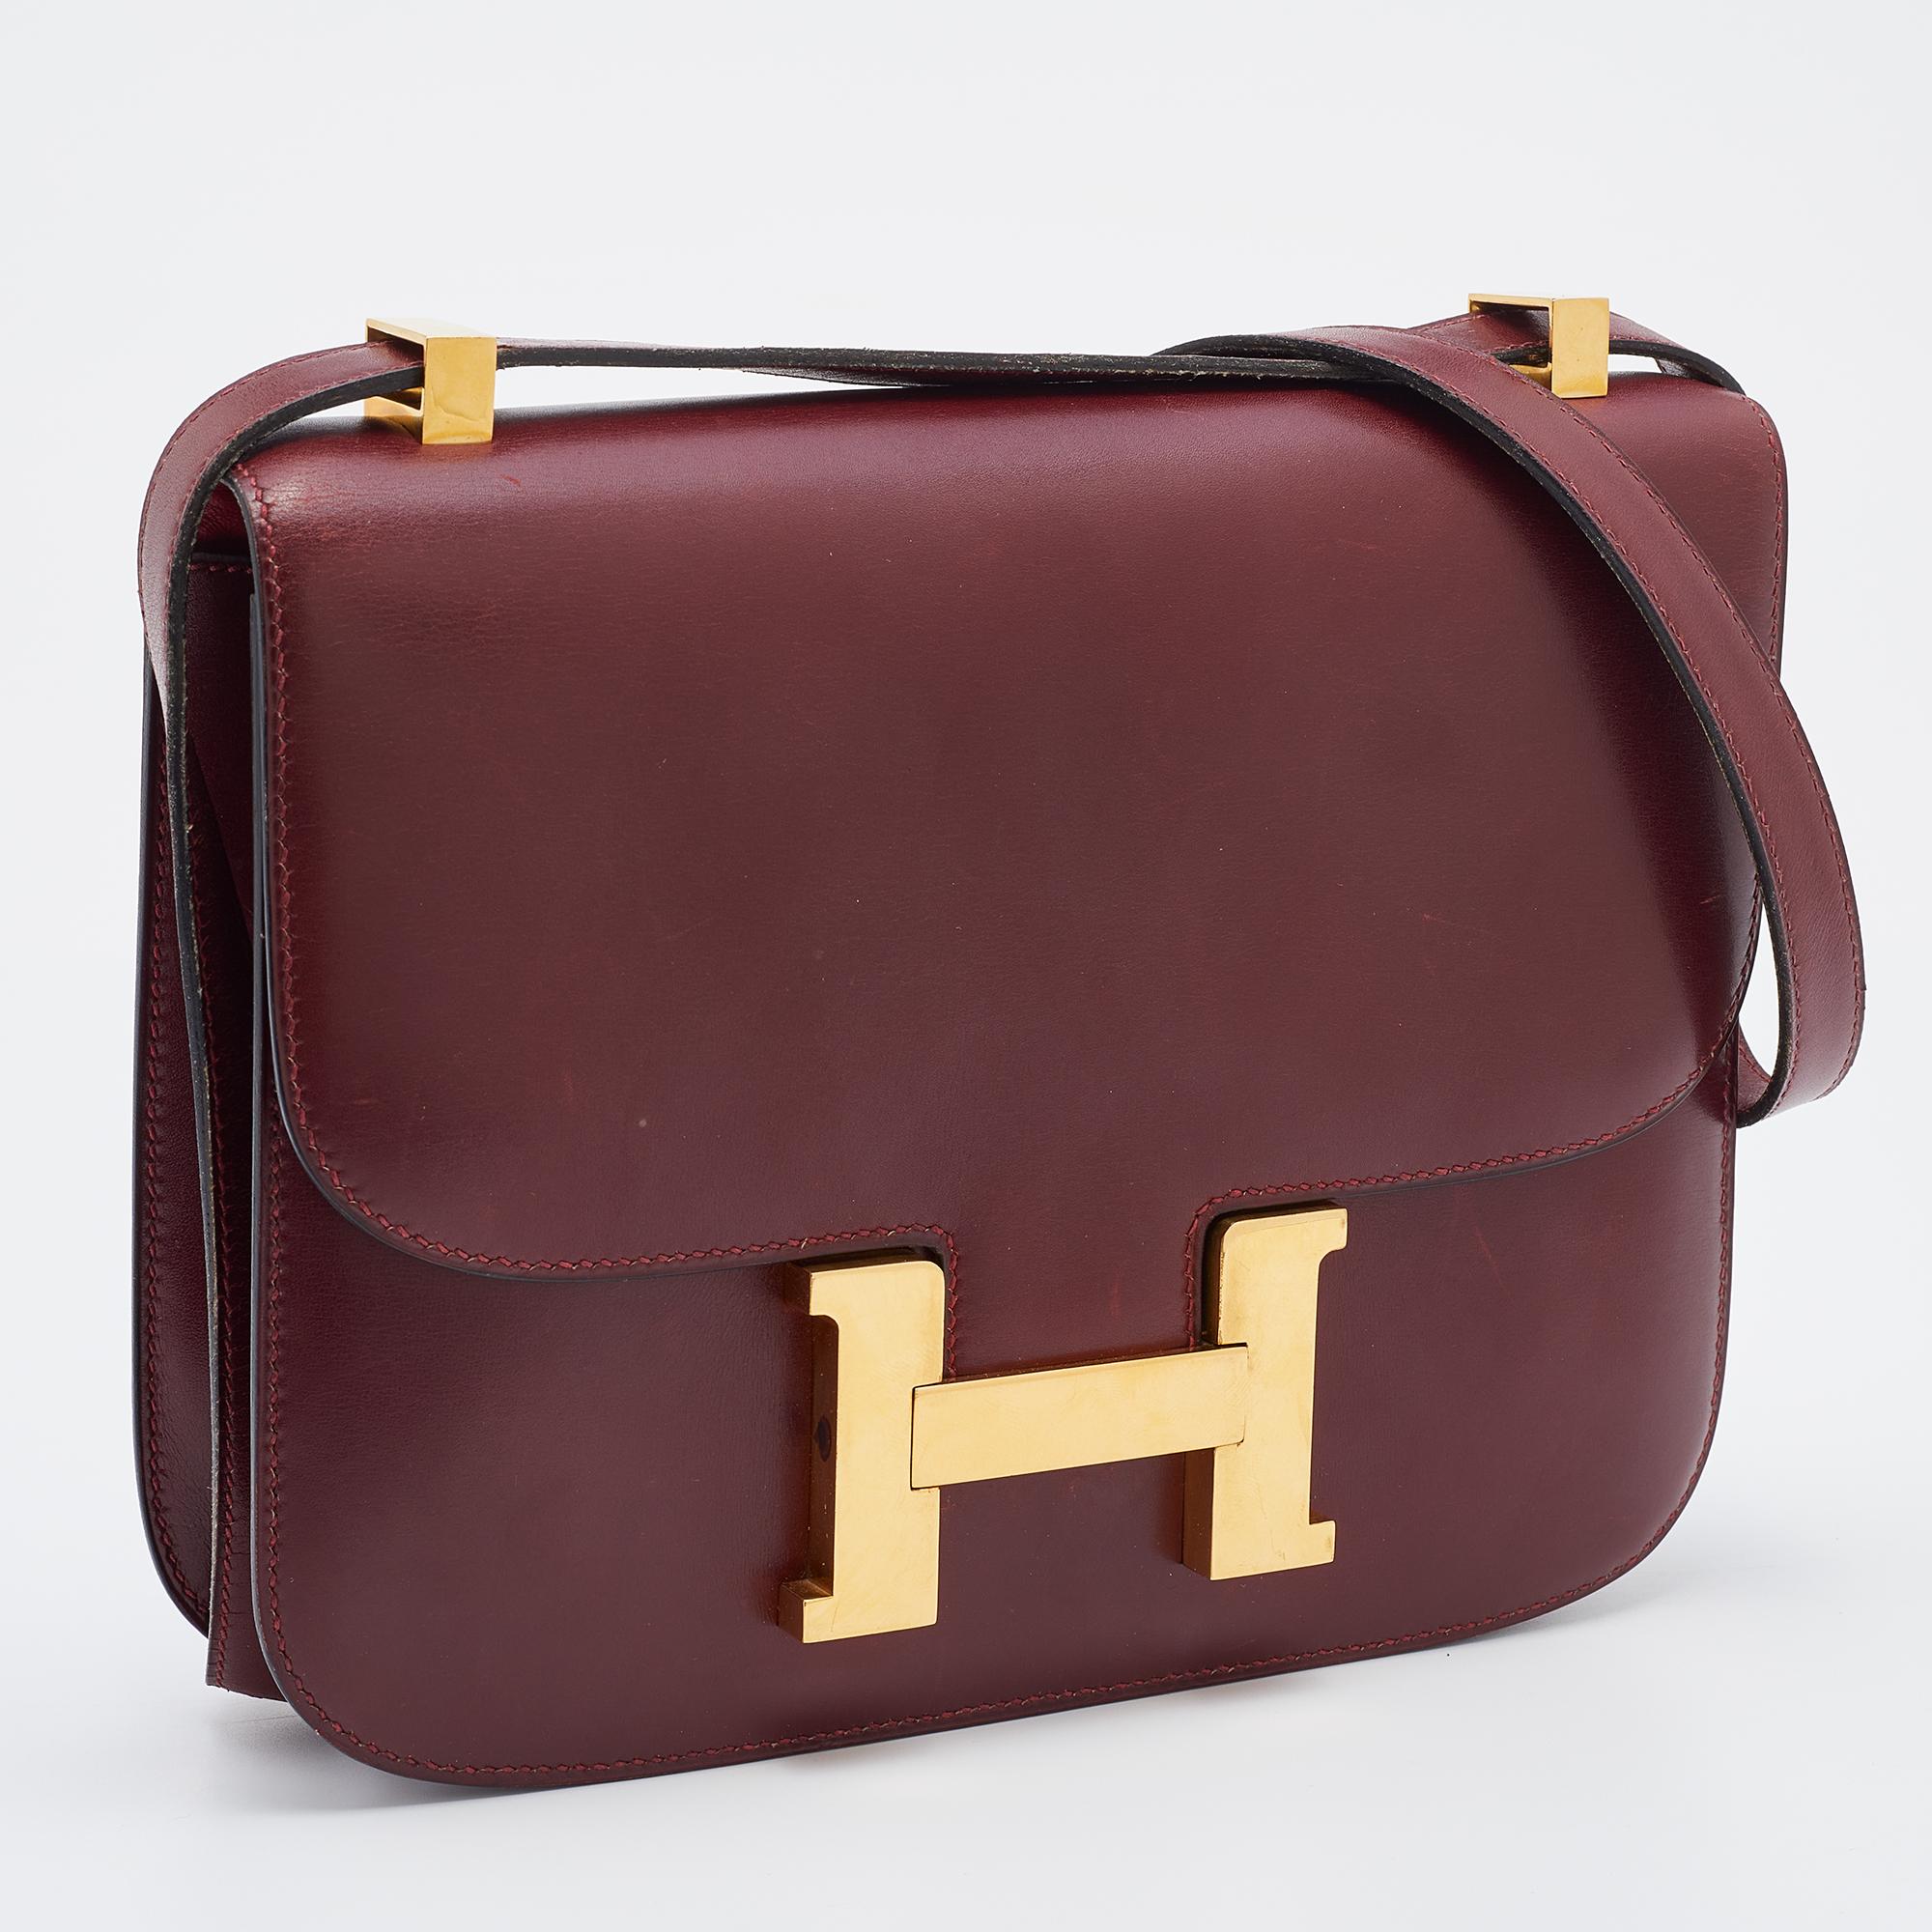 Hermès handbags are known for their unique designs that emanate the label's elegant flair, and the label's immaculate craftsmanship makes their creations last season after season. Here is a stunning bag, meticulously crafted and stitched to